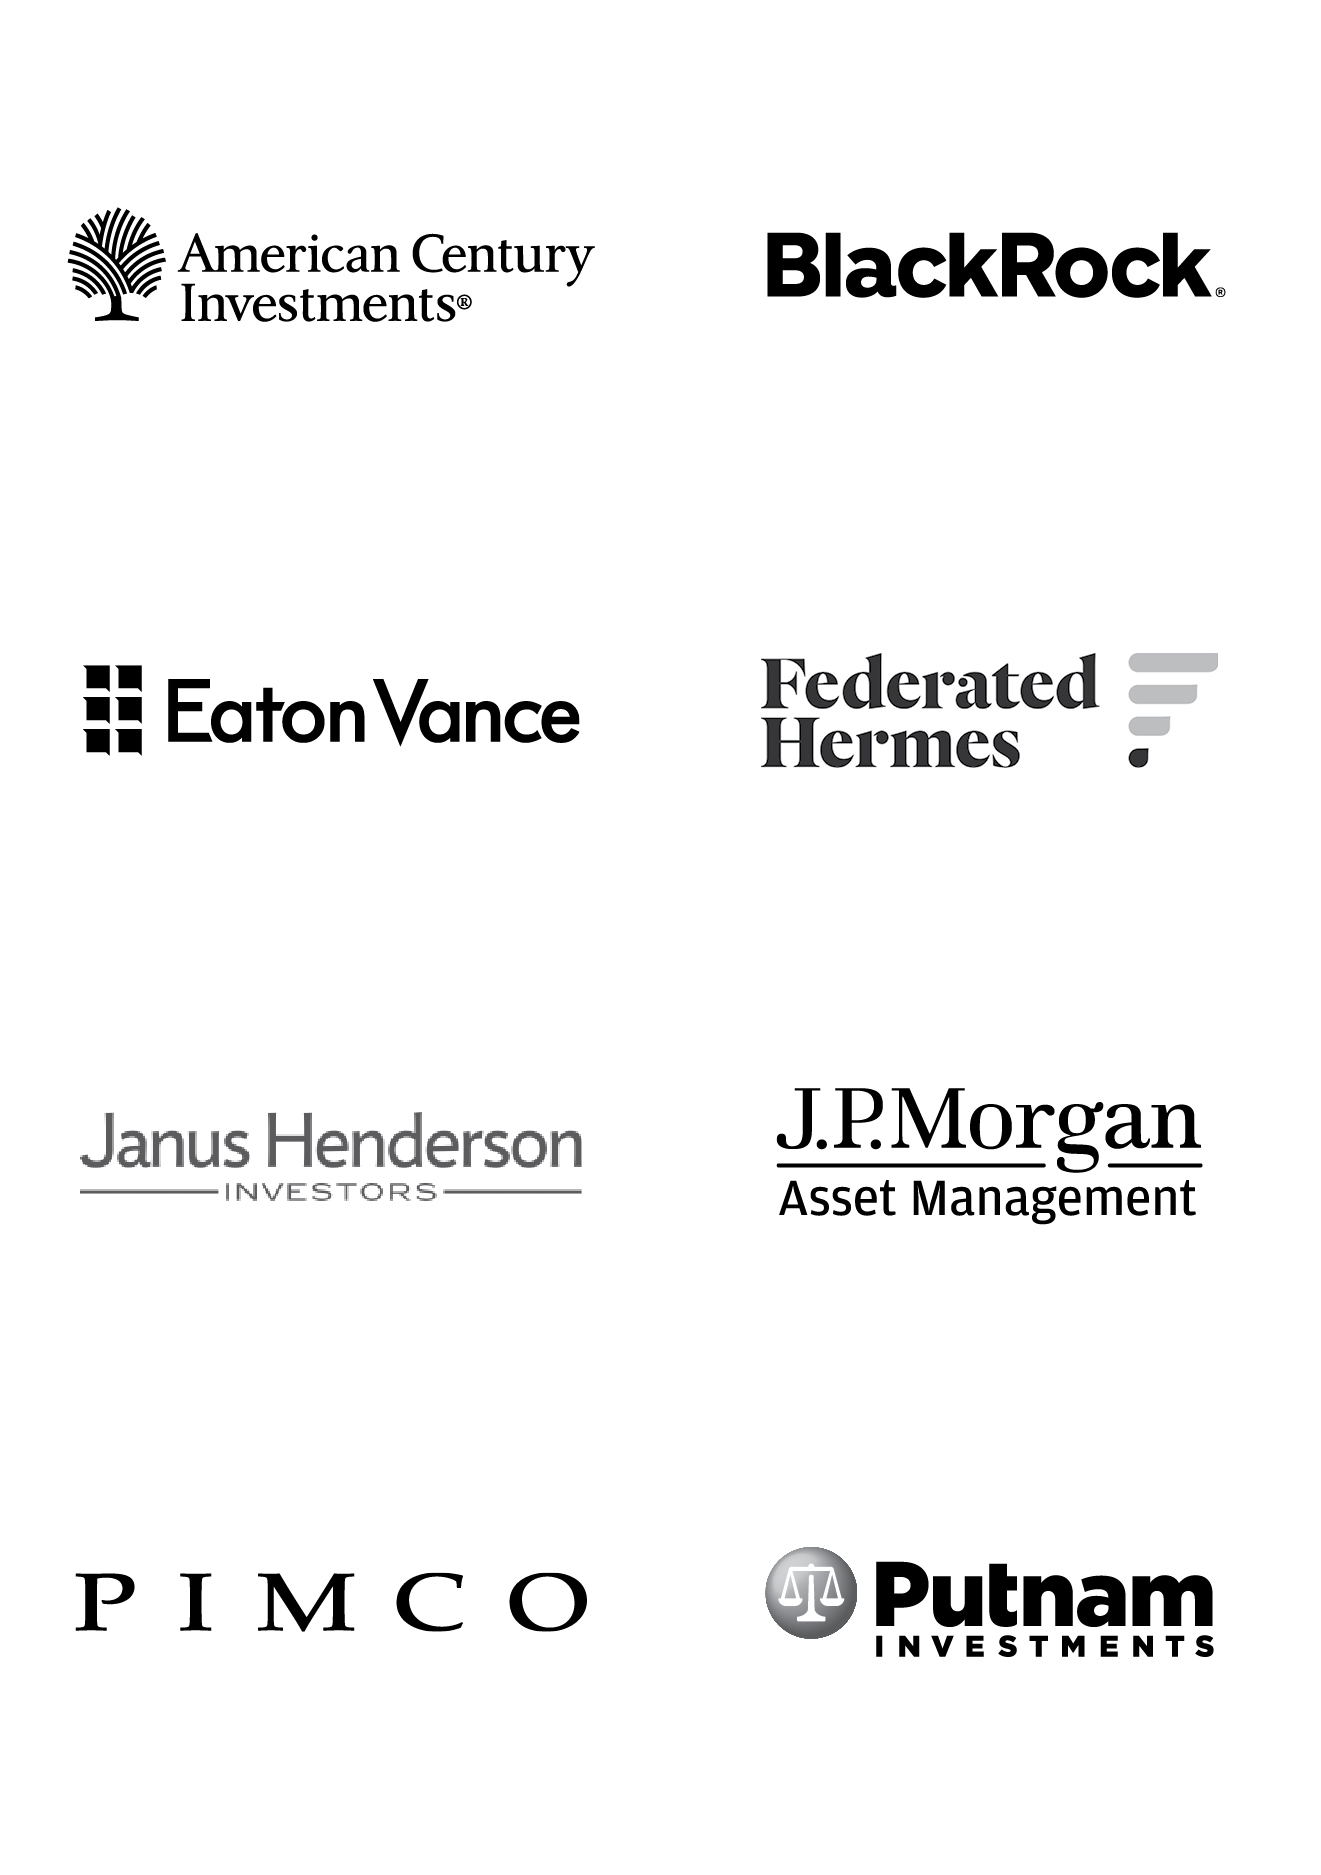 investment manager logos